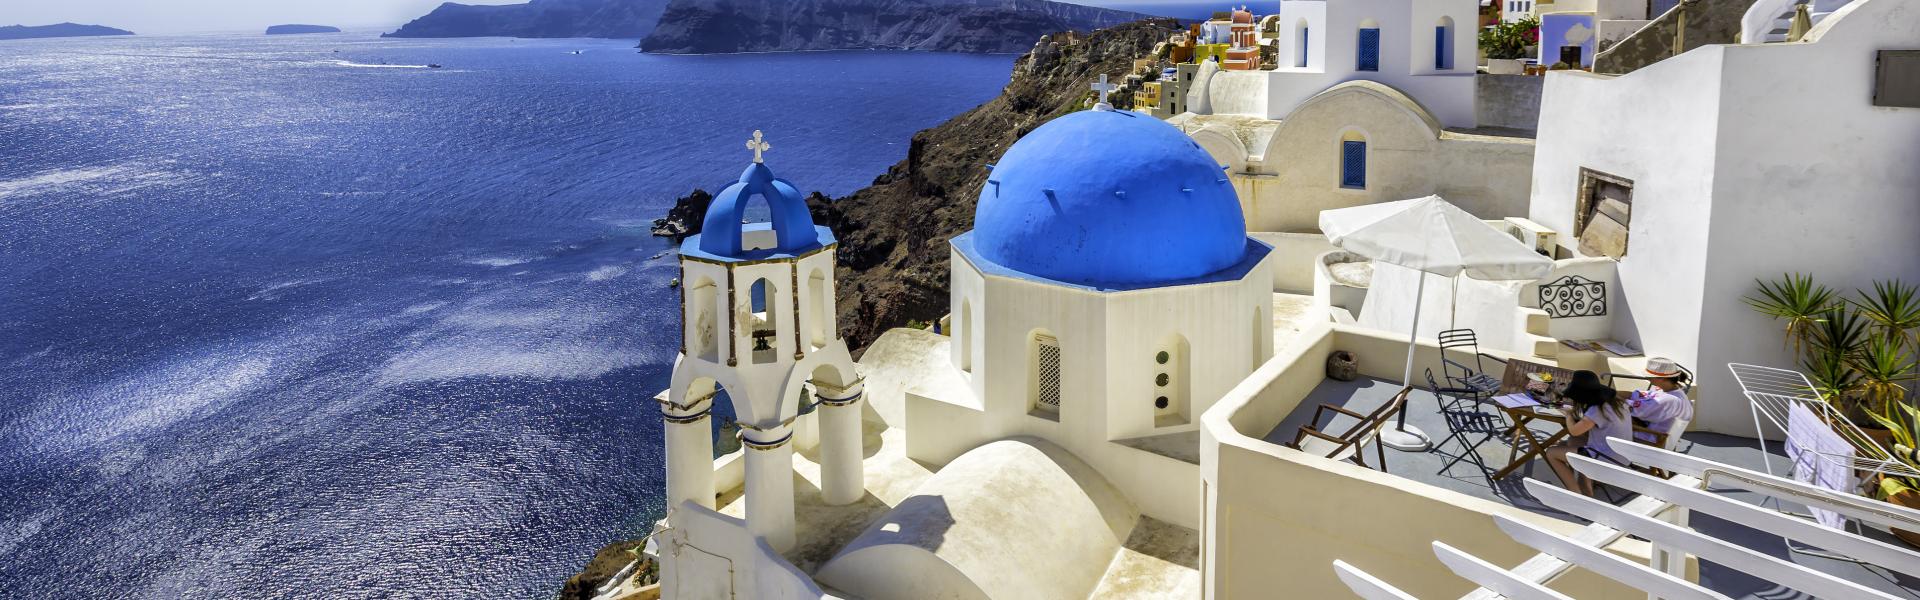 Find the perfect vacation home on Santorini - Casamundo